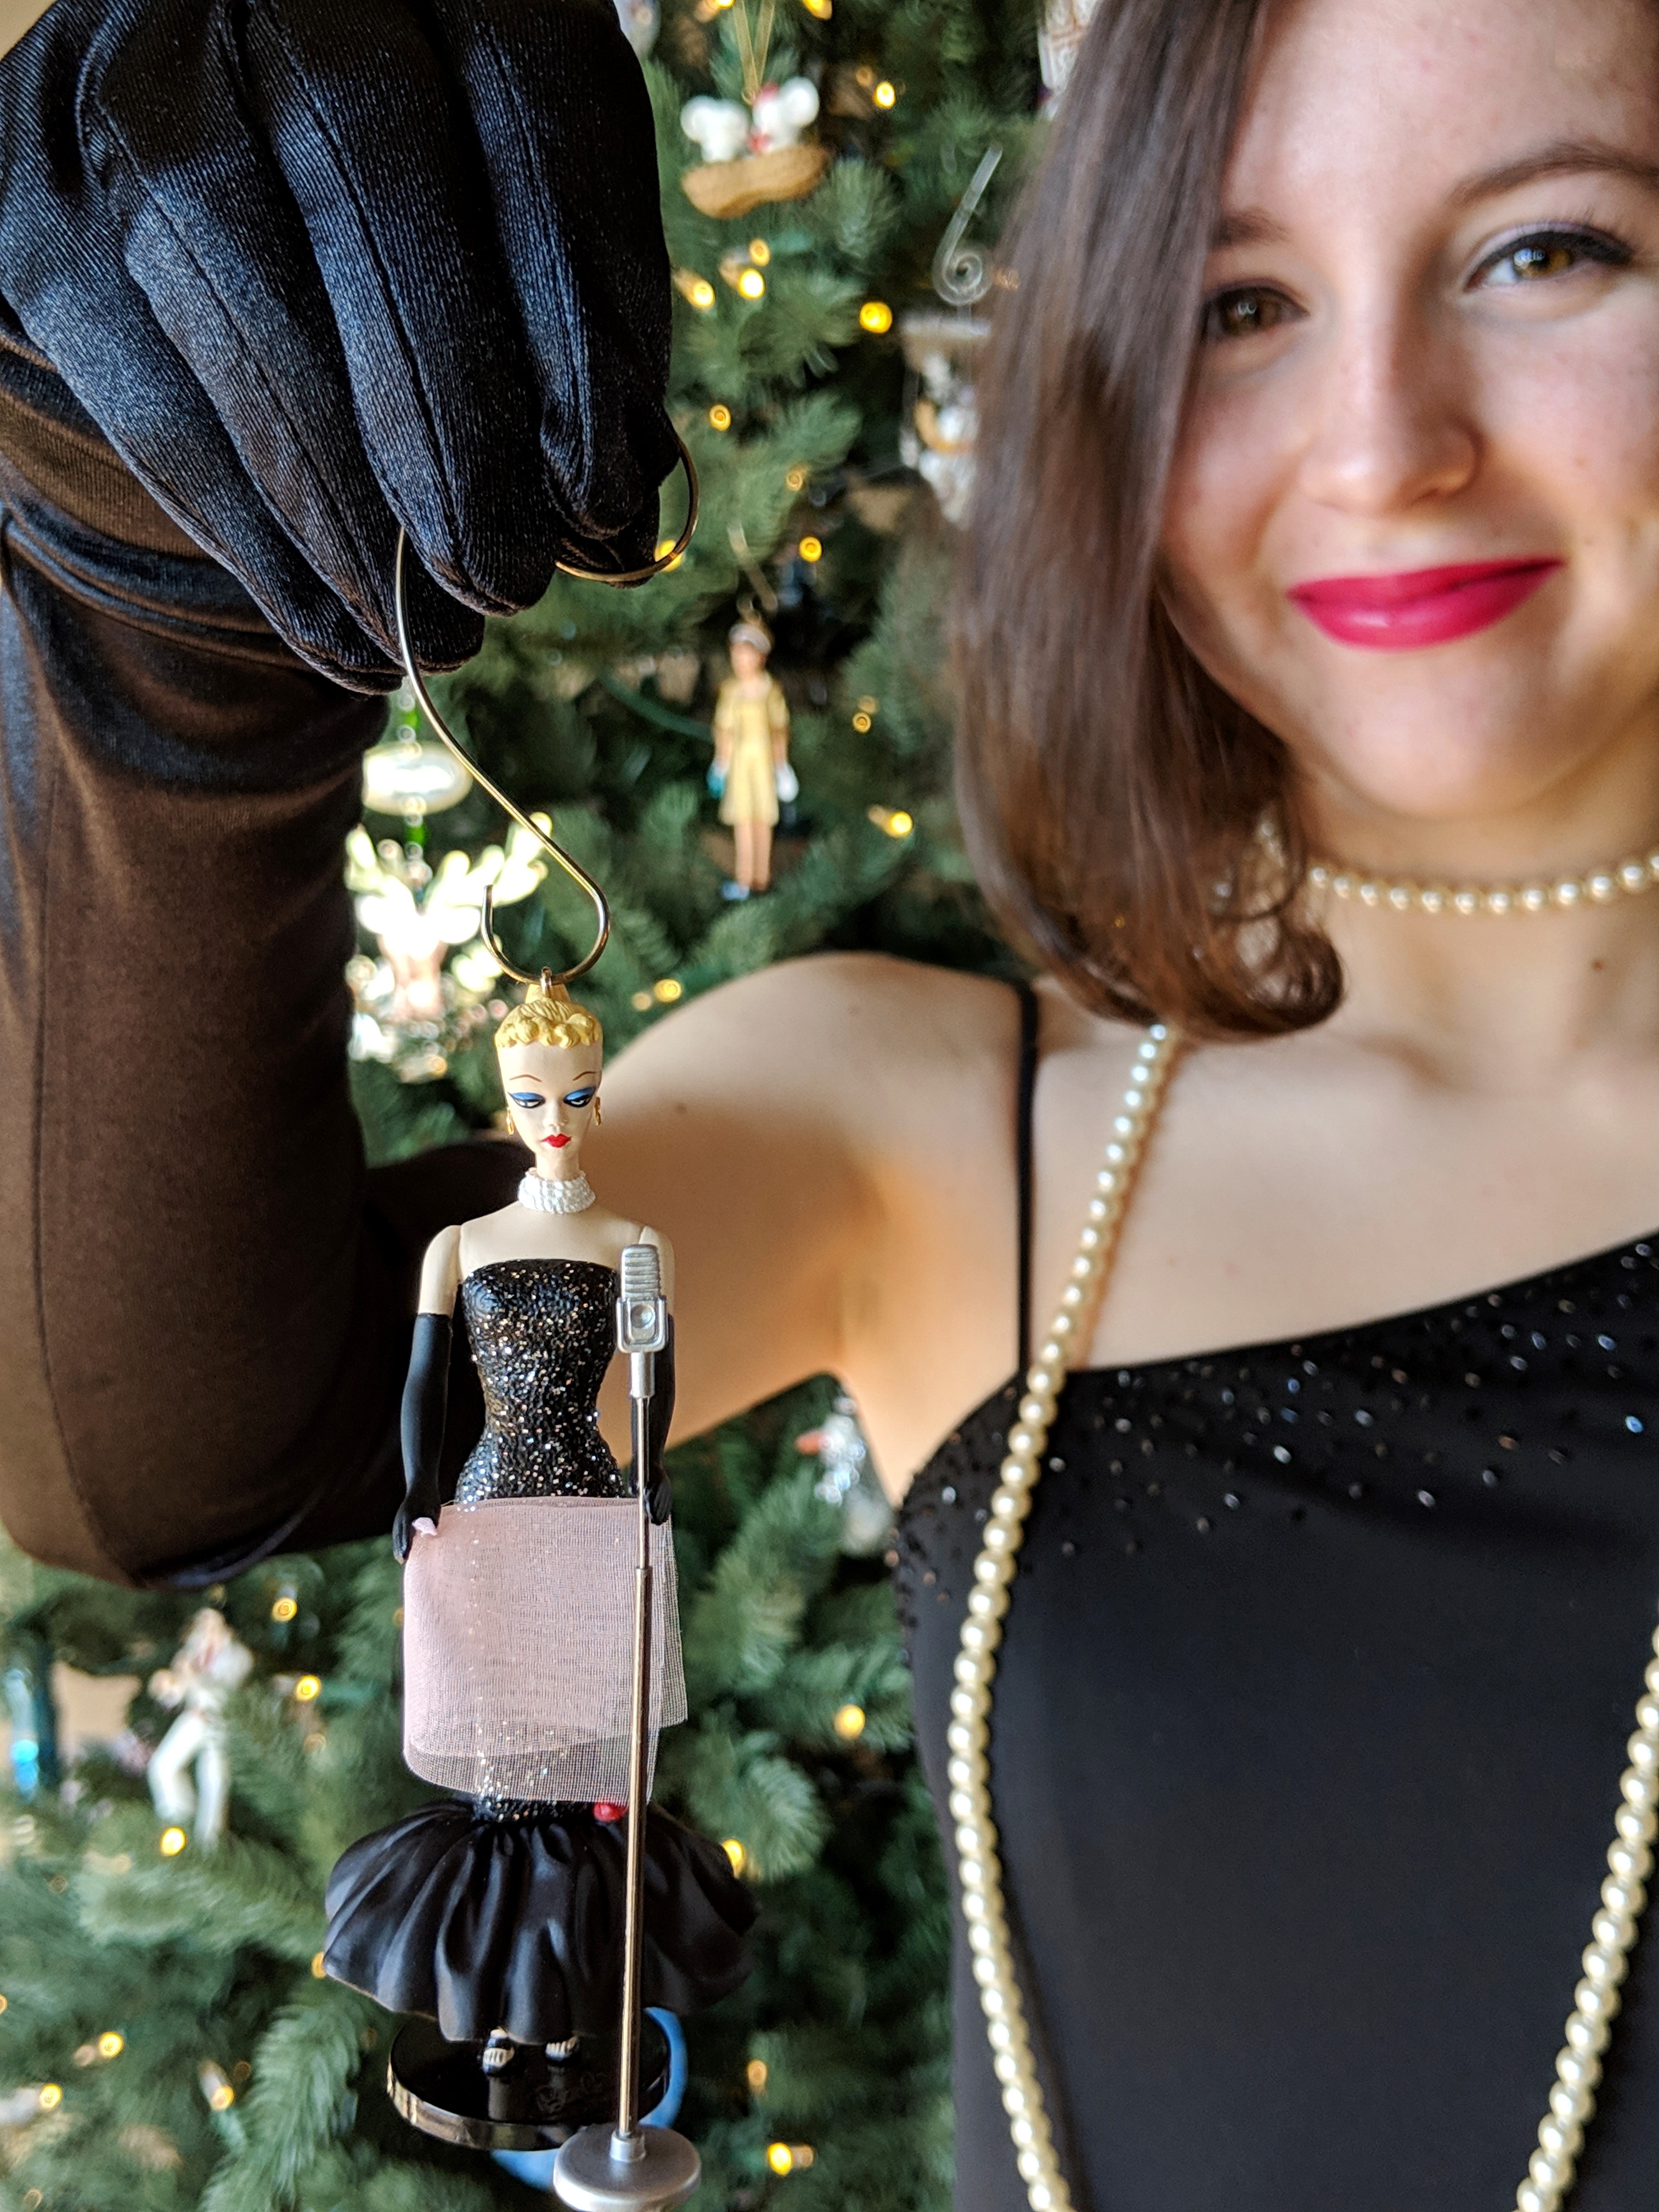 Barbie ornaments, formal gown, fancy holiday outfit